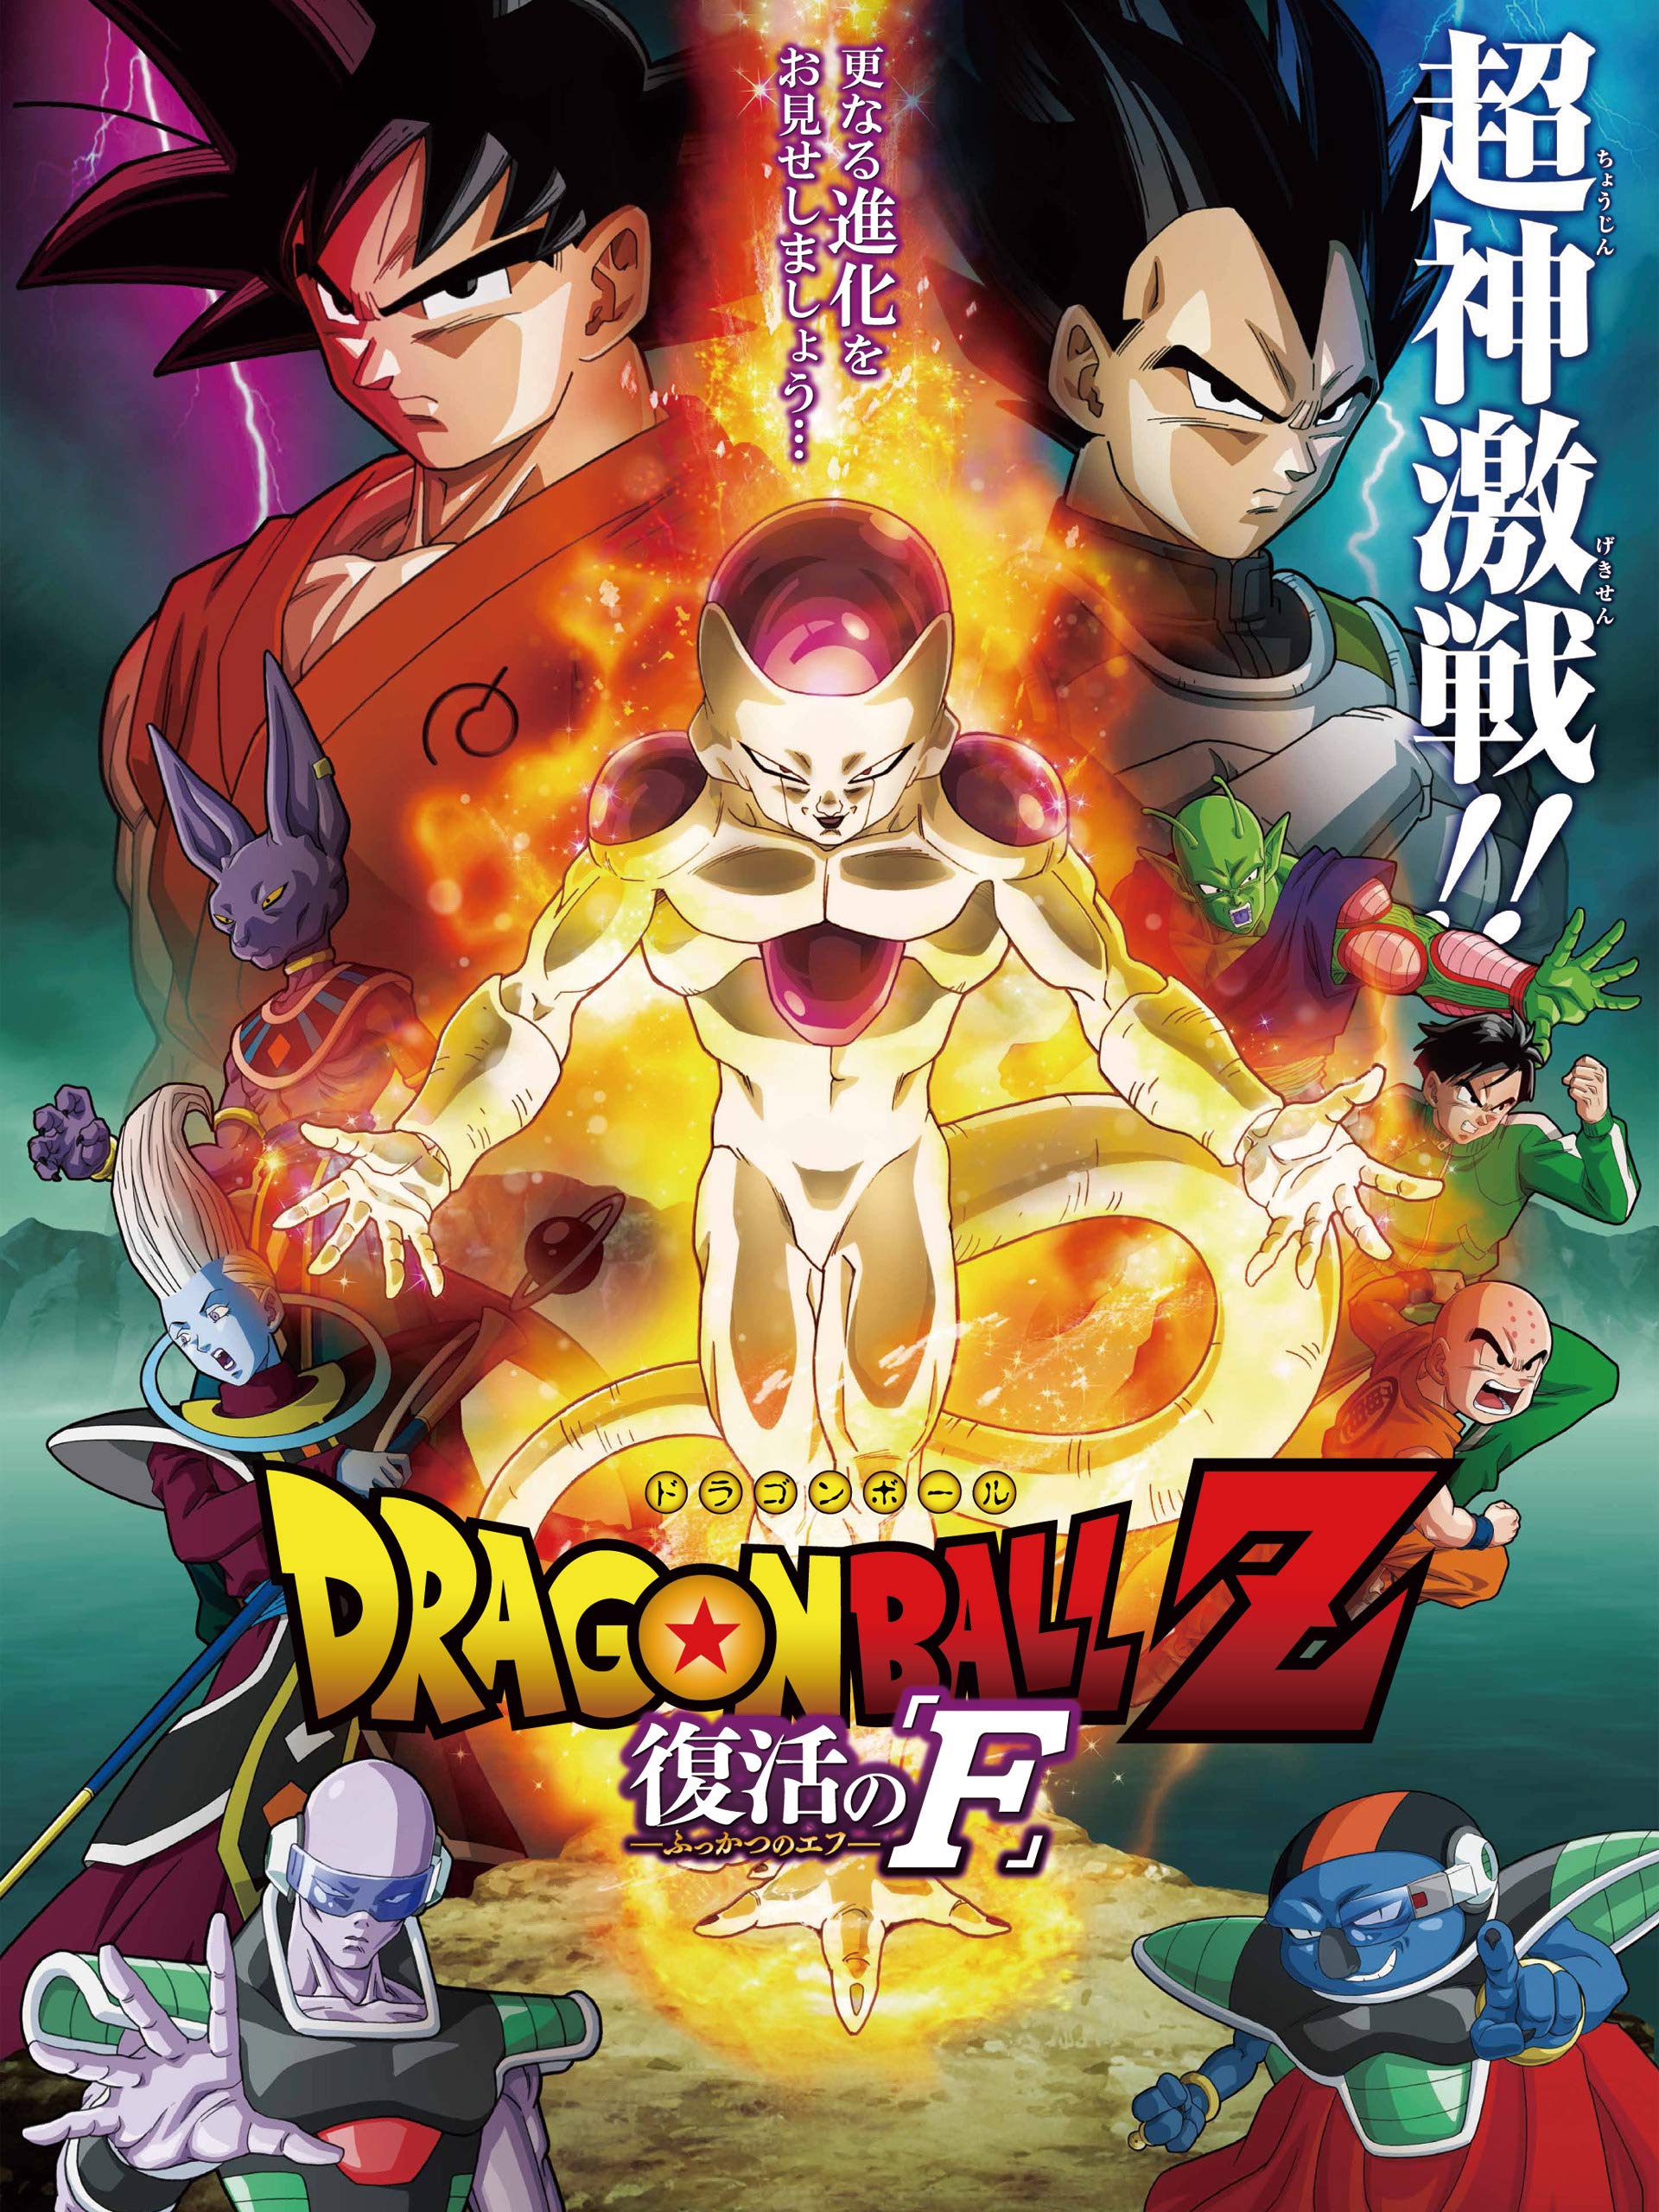 ashley lauren henderson recommends free dragon ball z movies pic